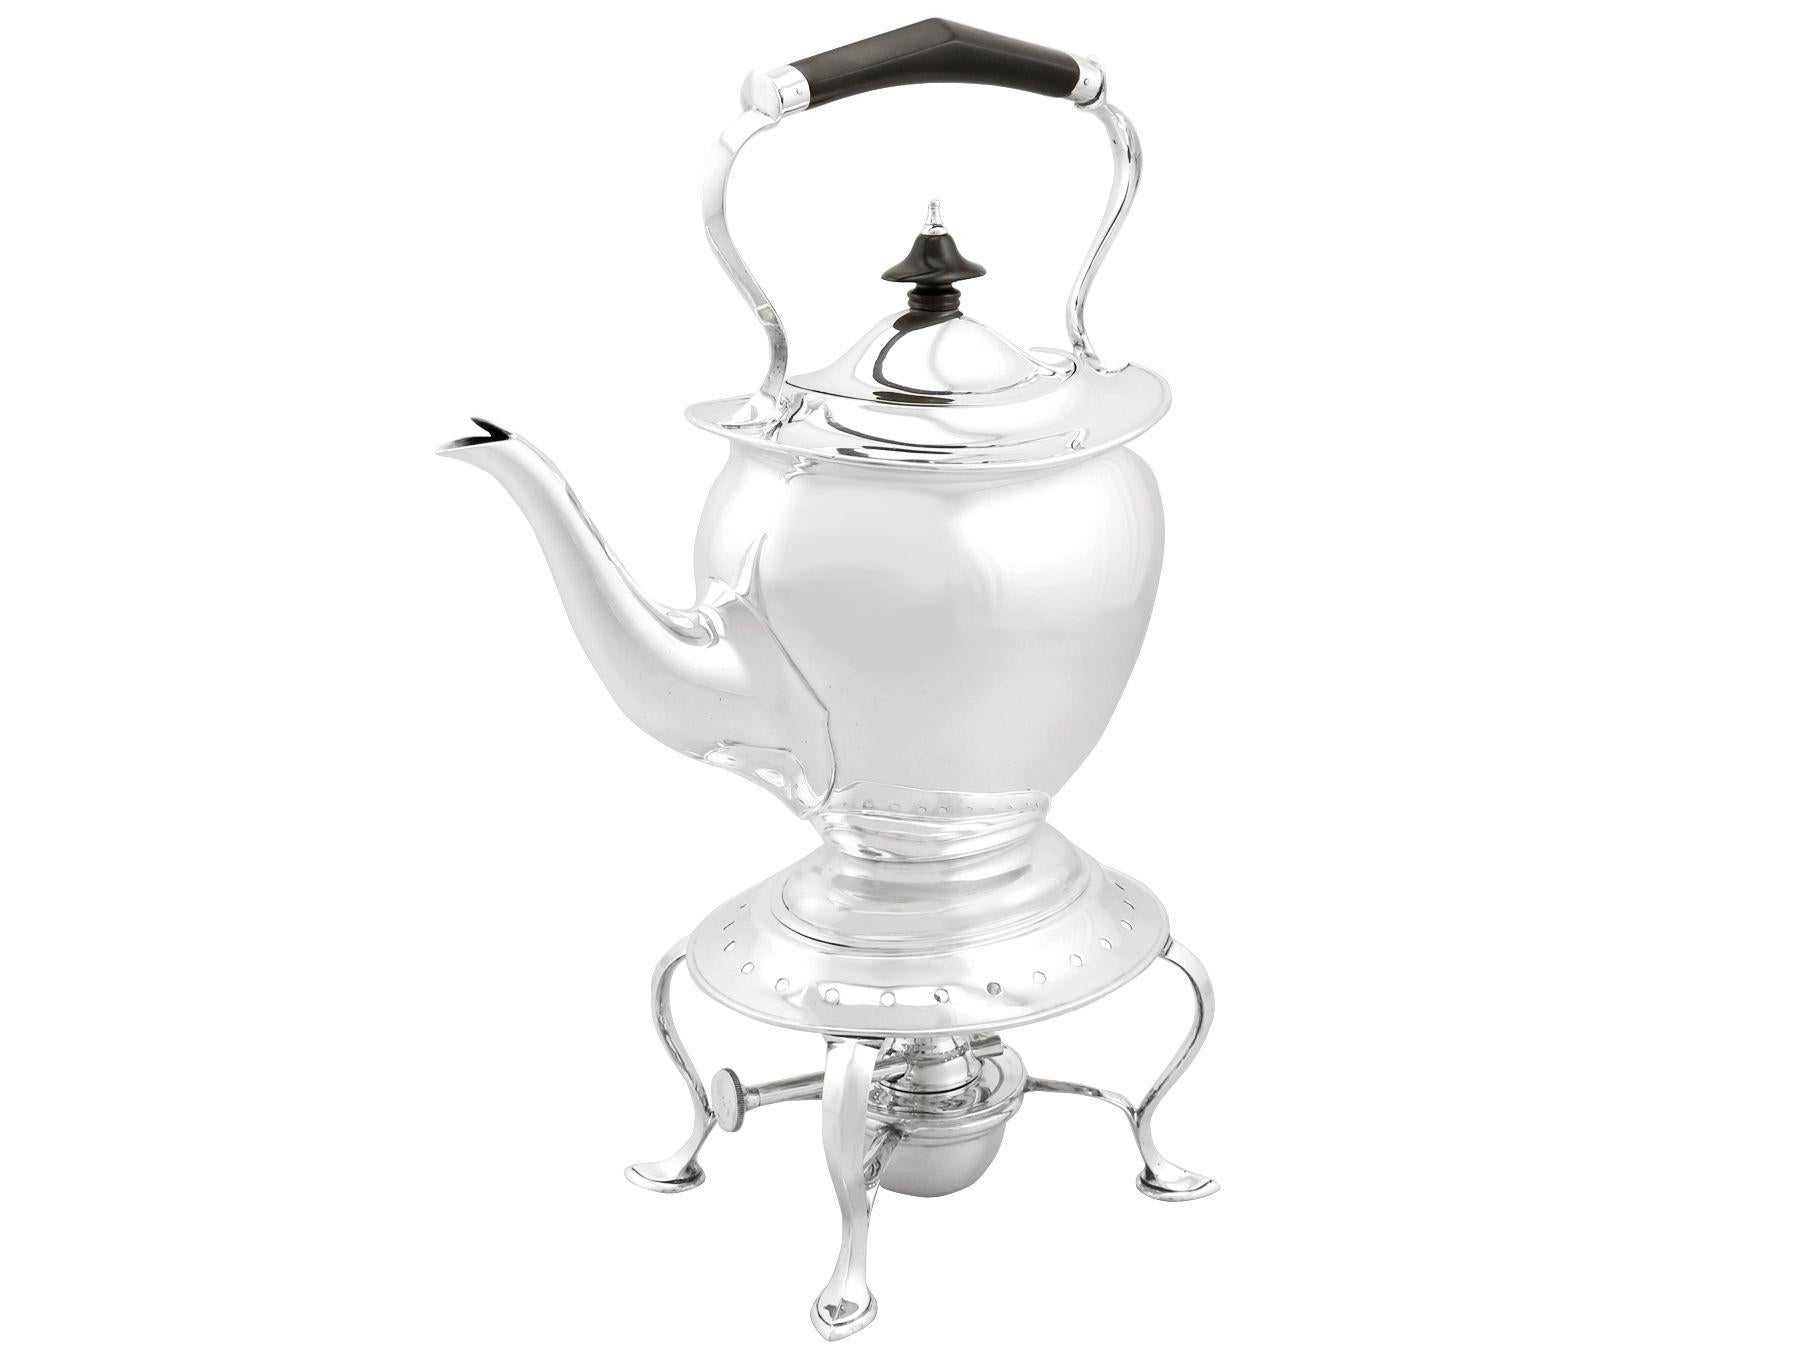 An exceptional, fine and impressive antique George V English sterling silver four piece tea service/set; part of our silver teaware collection

This exceptional antique George V sterling silver 4 piece tea set consists of a spirit kettle, teapot,